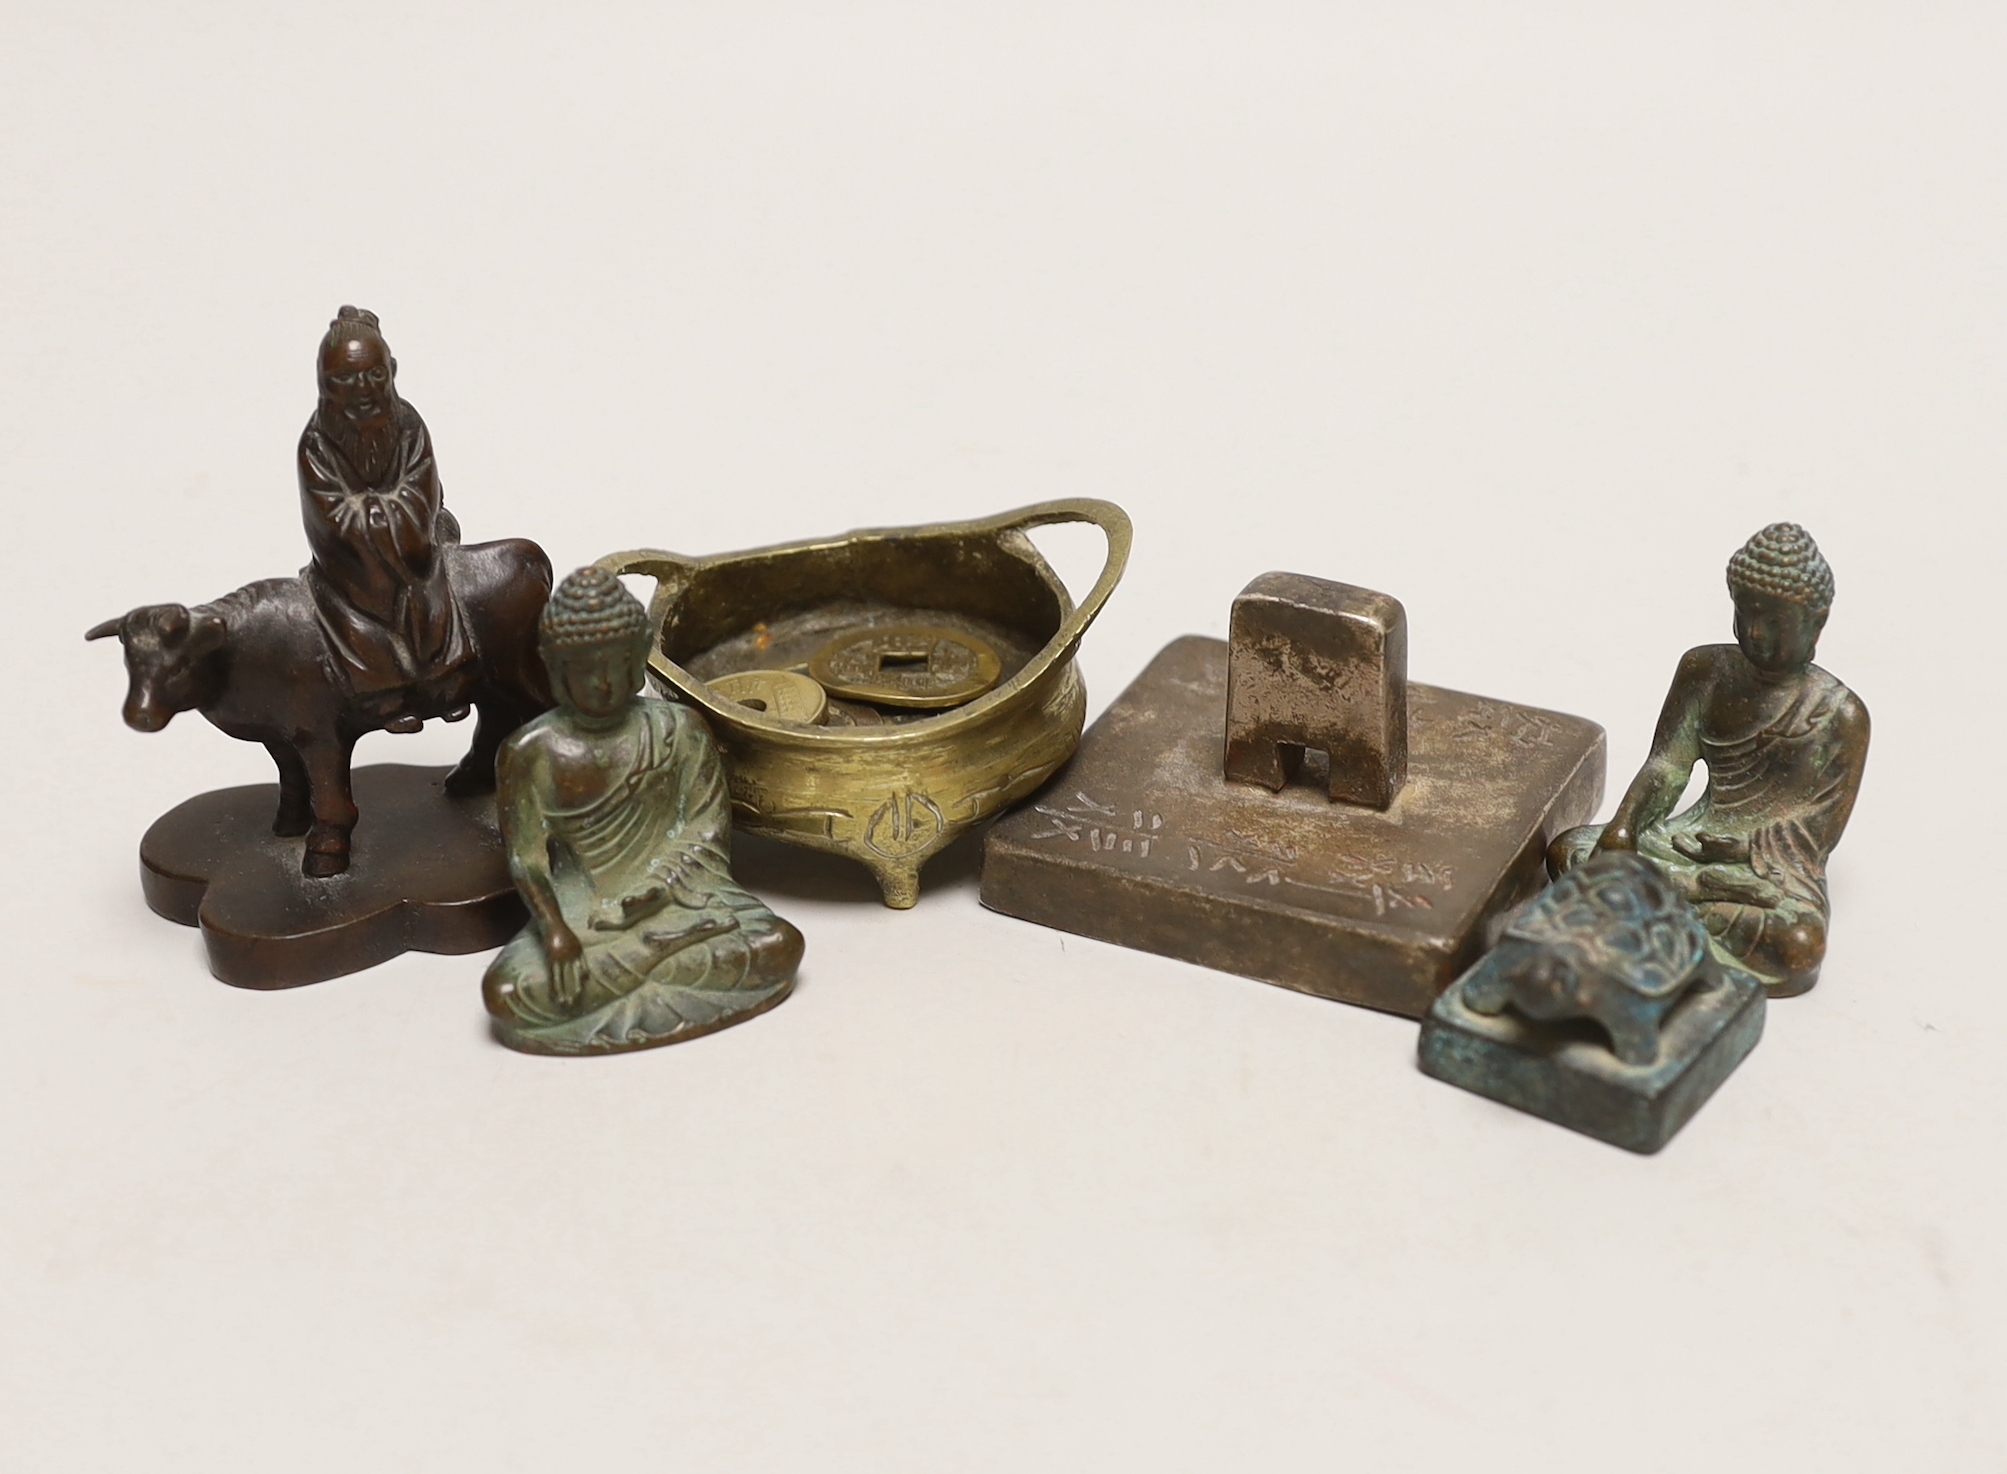 Five Chinese coins, five seals and a miniature censer                                                                                                                                                                       